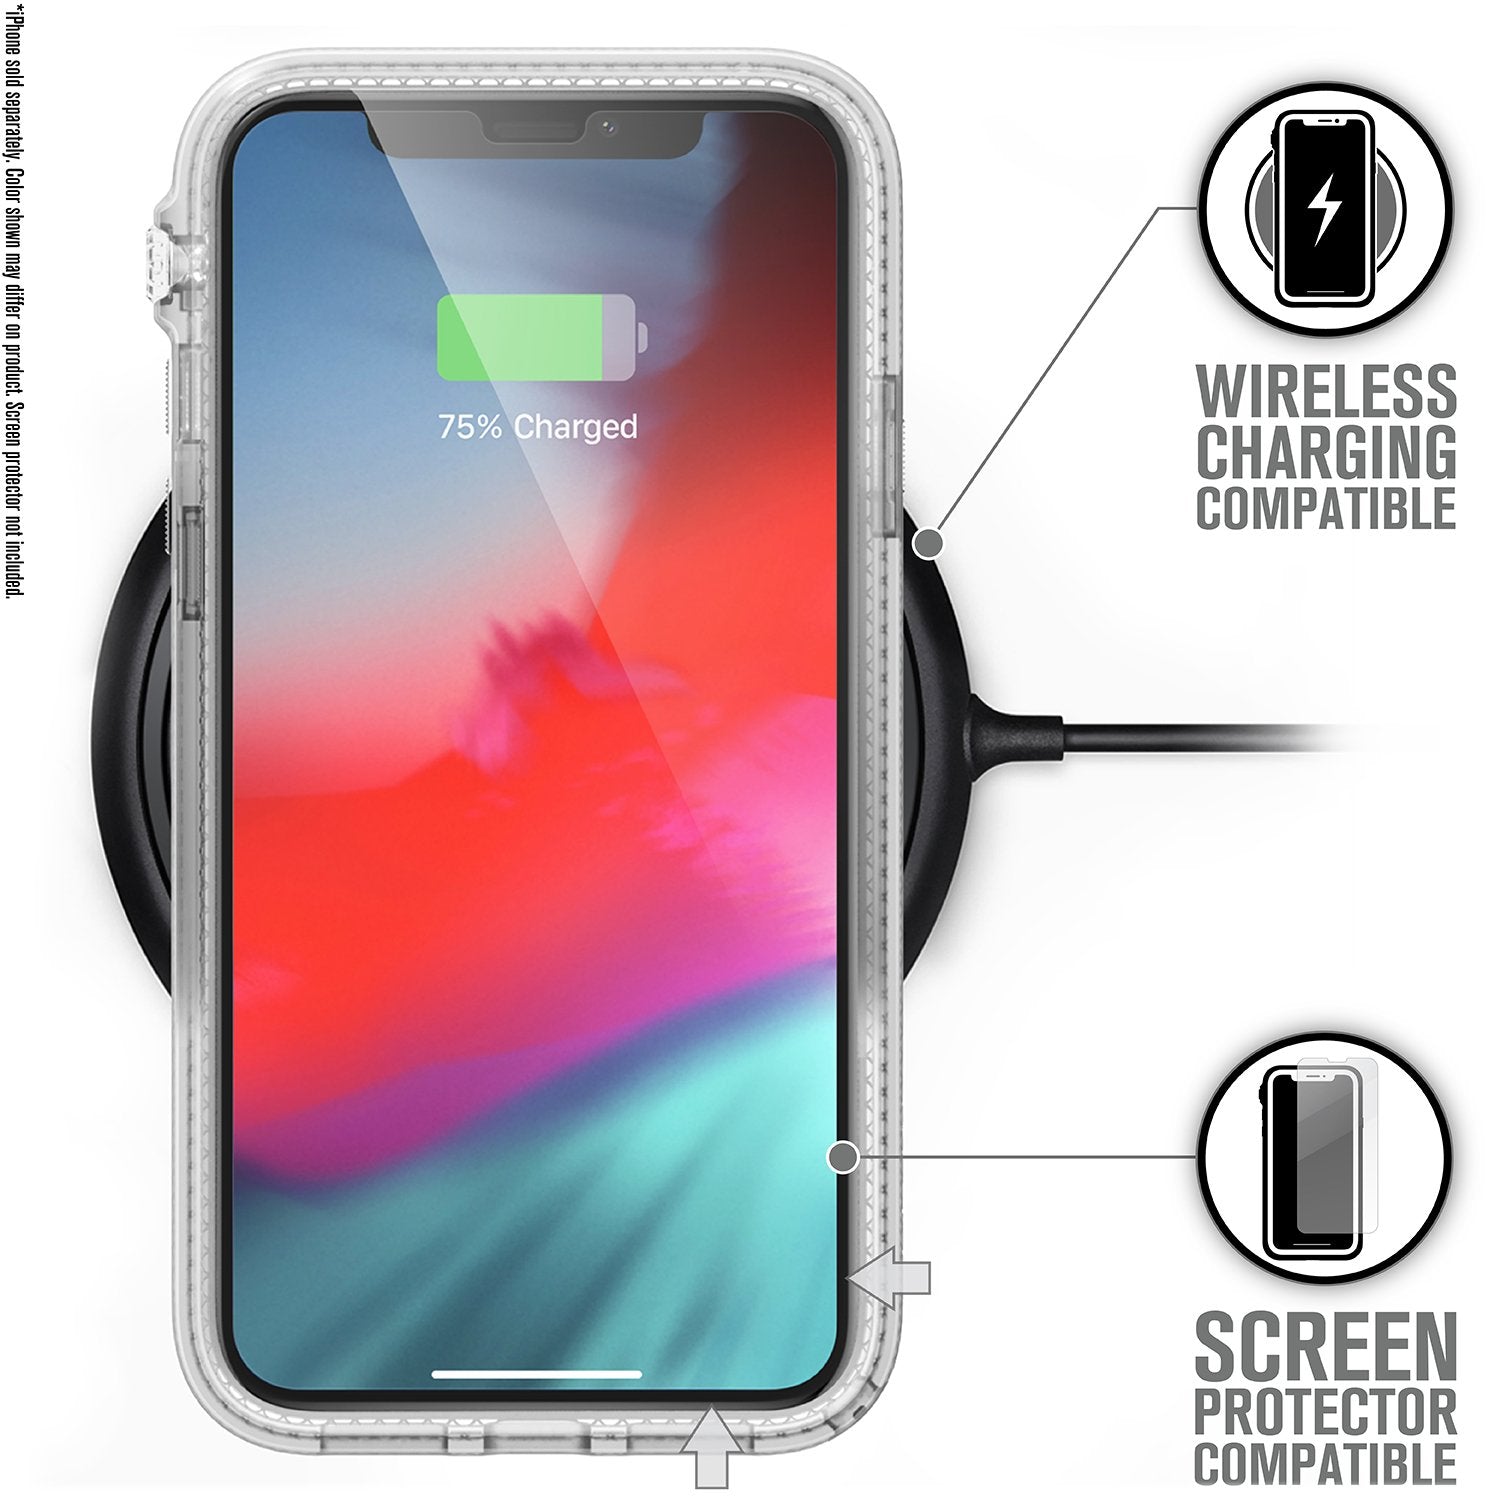 iPhone X/XR/Xs/Xs Max - Impact Protection Case